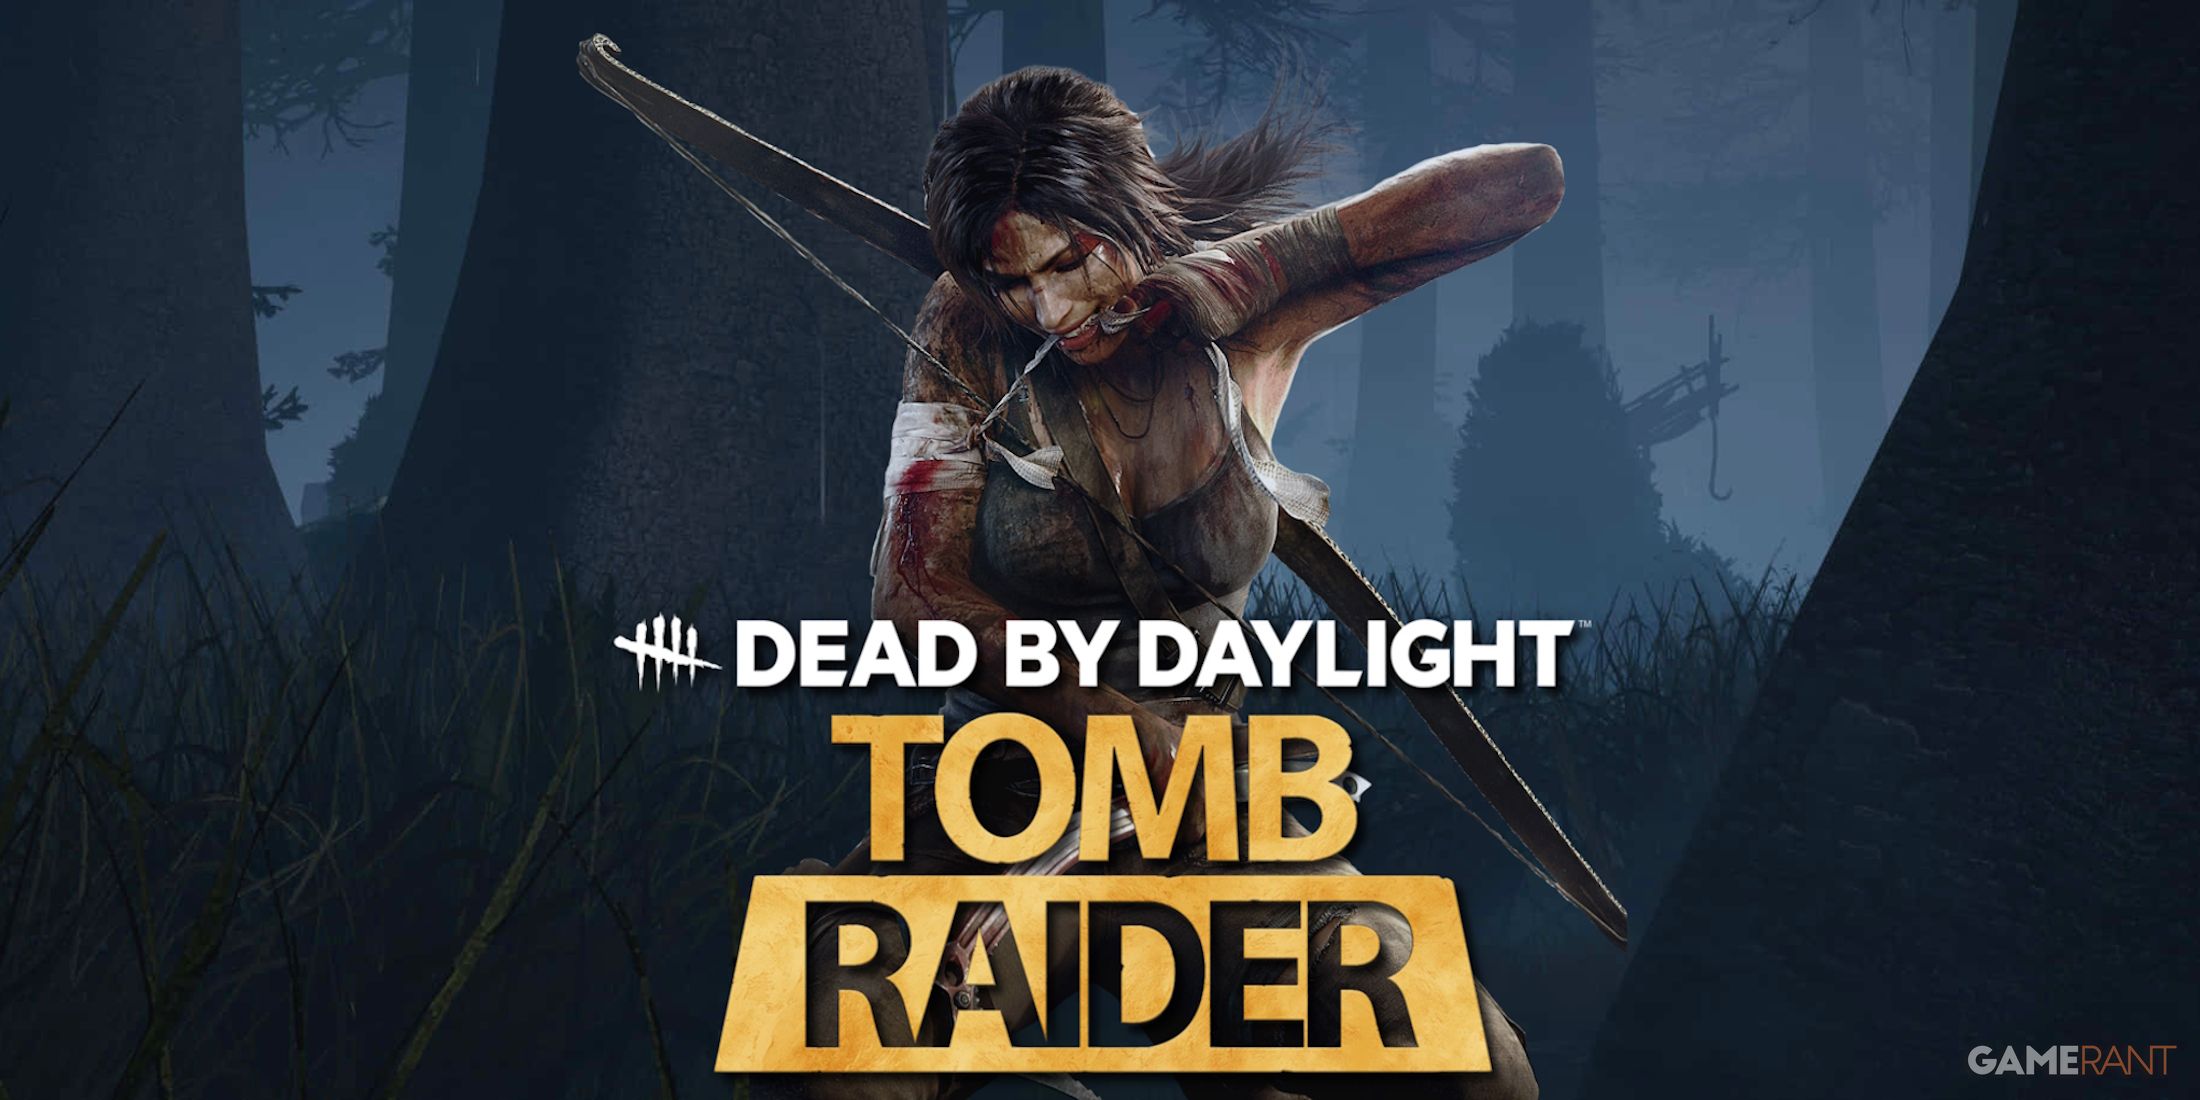 lara croft coming to dead by daylight rumor